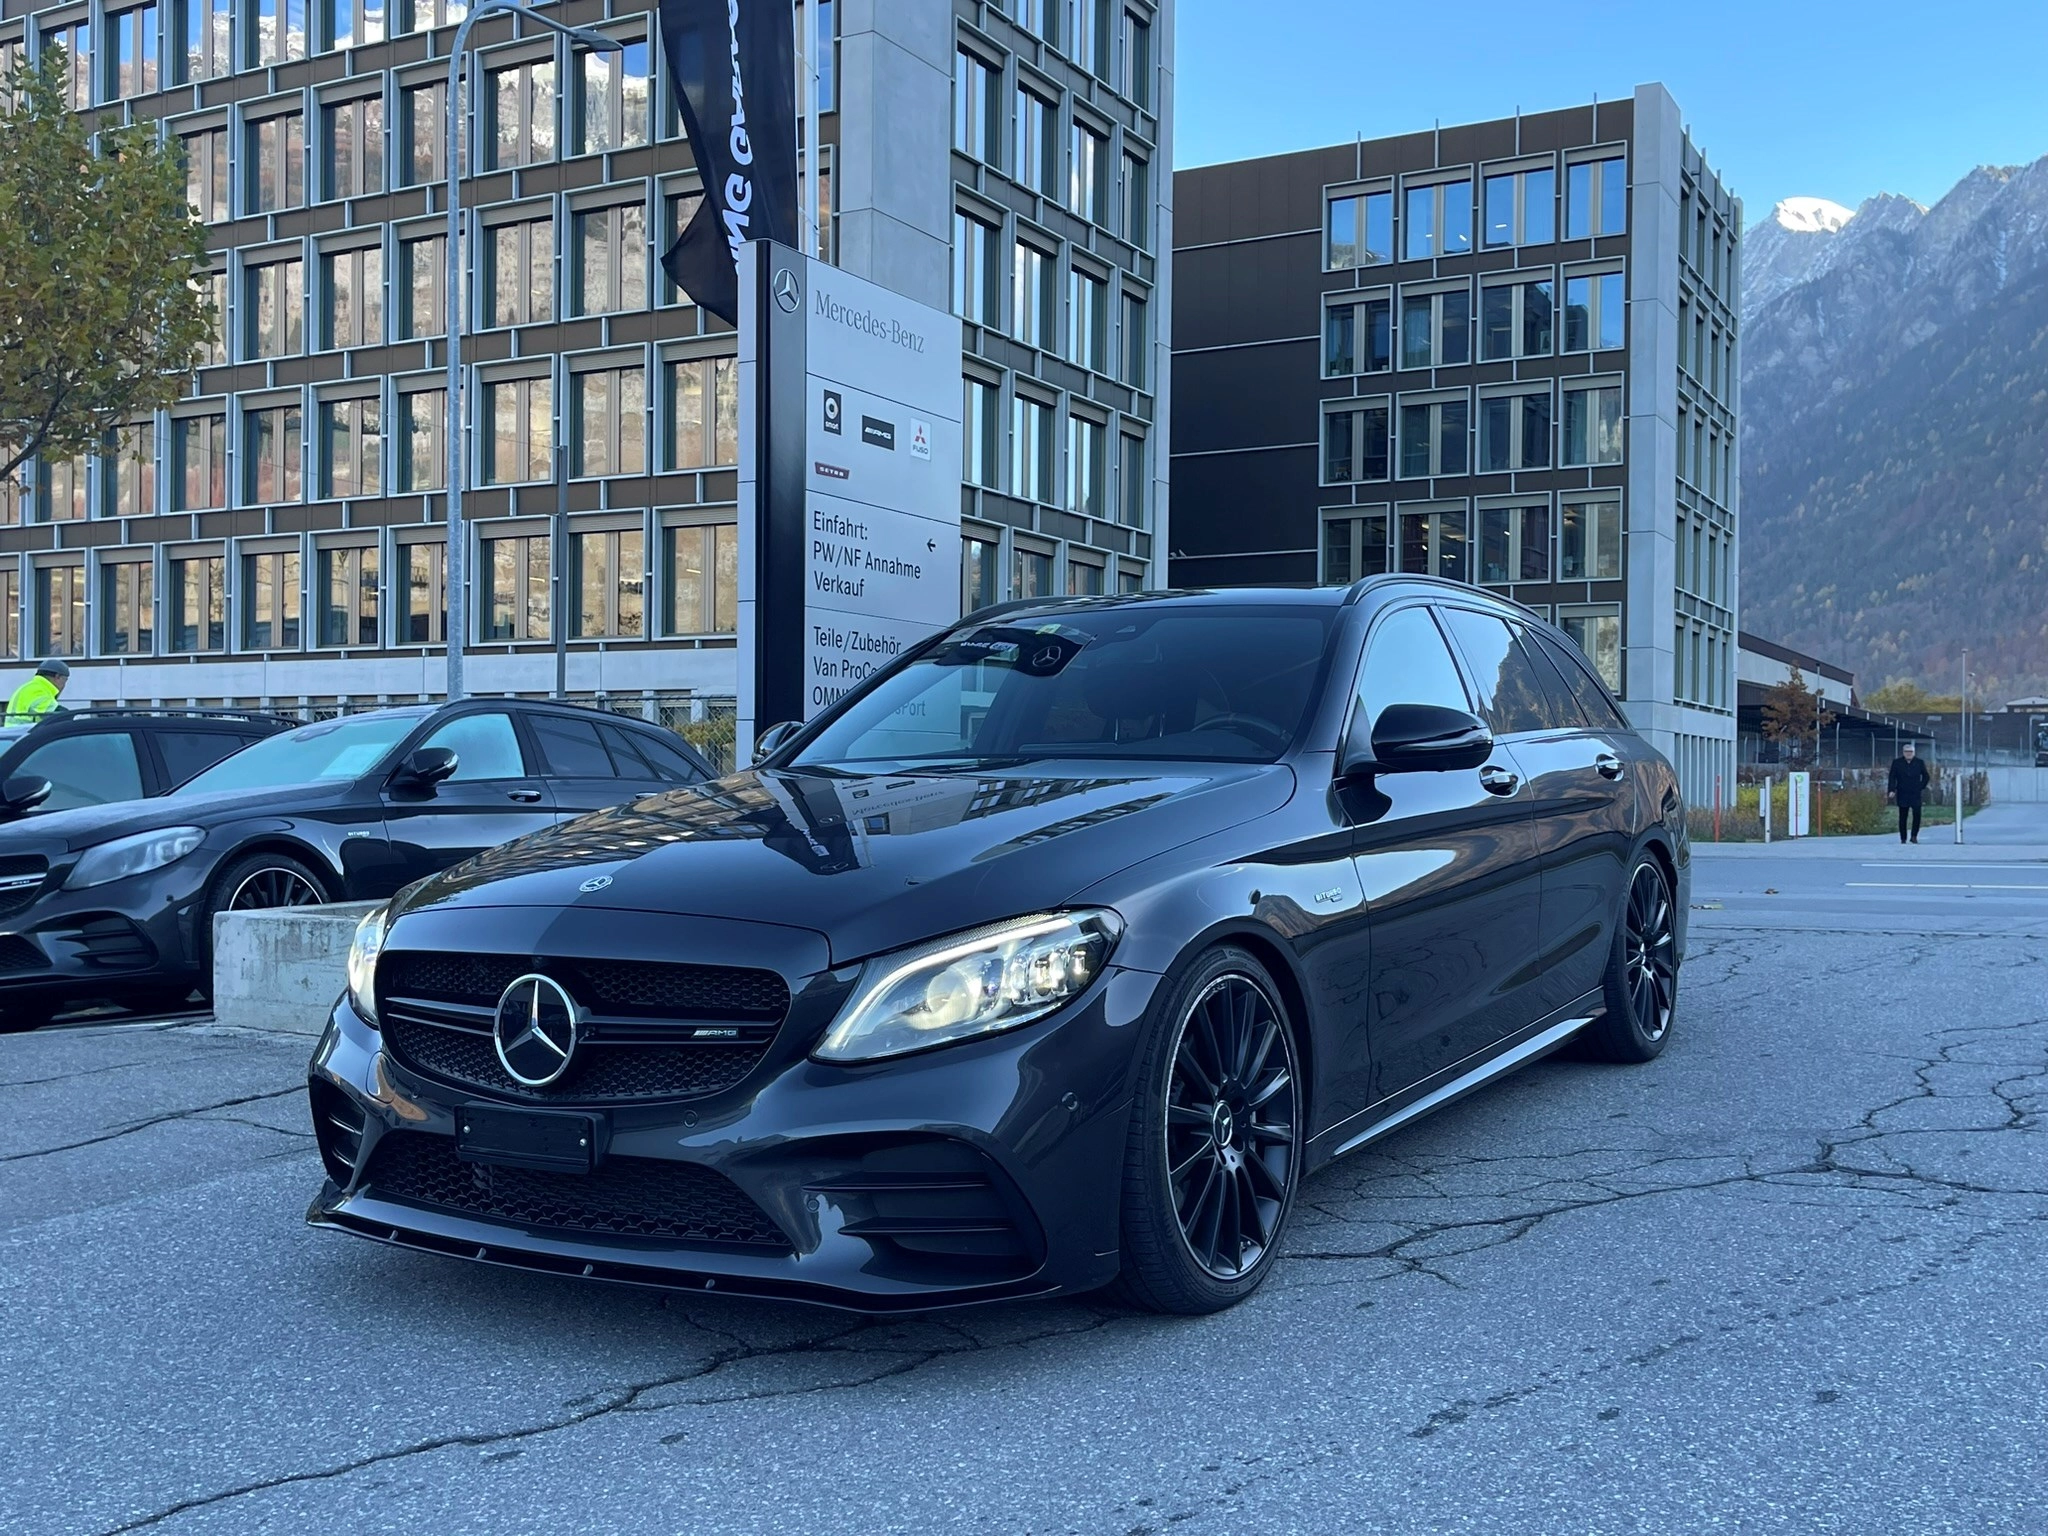 Mercedes-Benz C-Class AMG Leasing in Switzerland from CHF 267